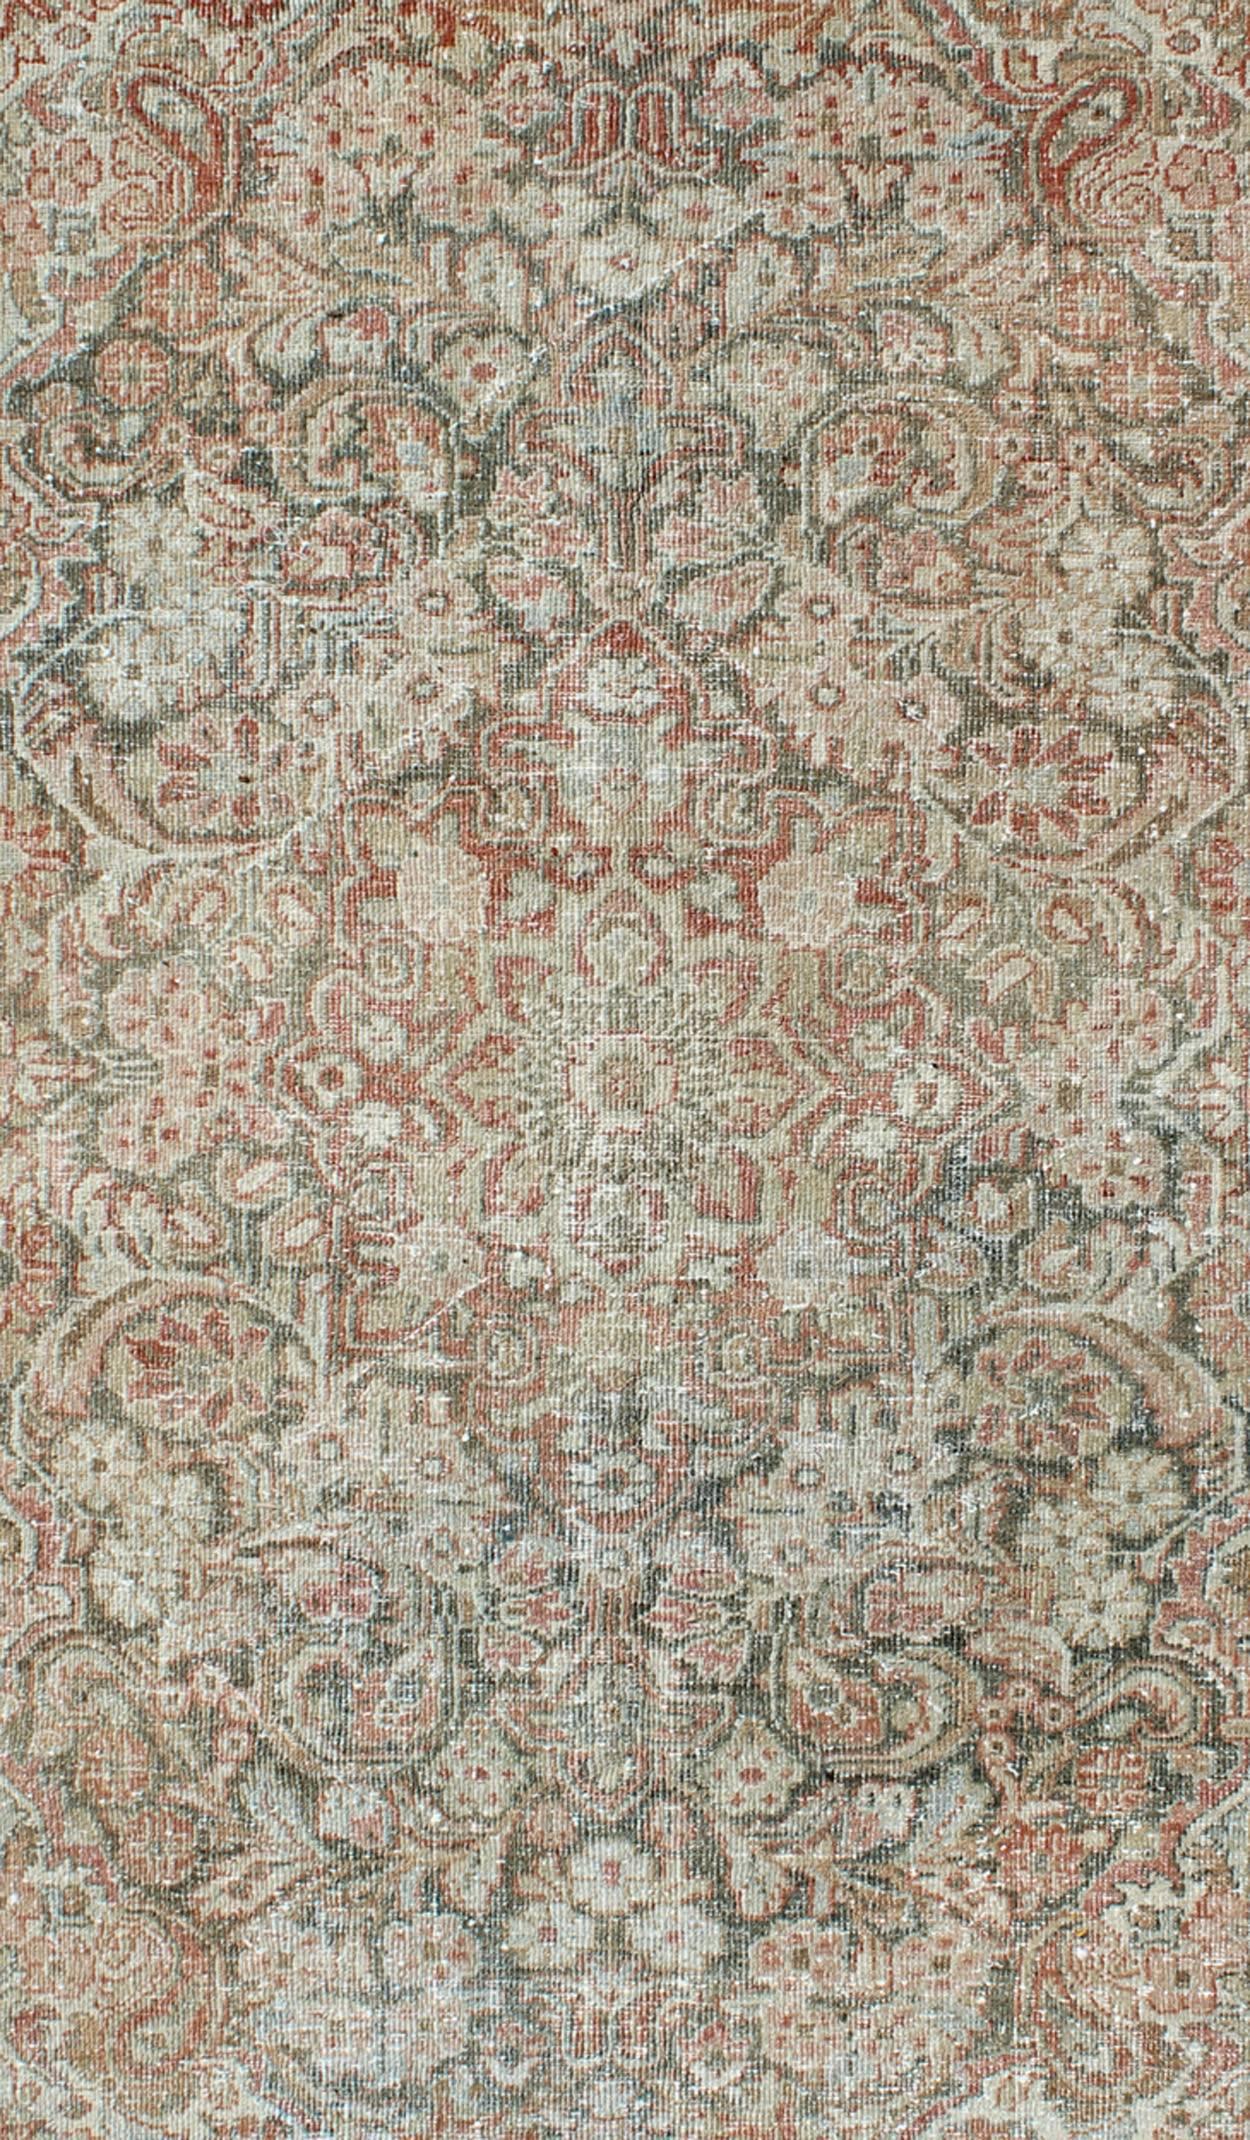 Sultanabad Antique Persian Mahal Carpet with Flowers and Palmettes in Faint Green